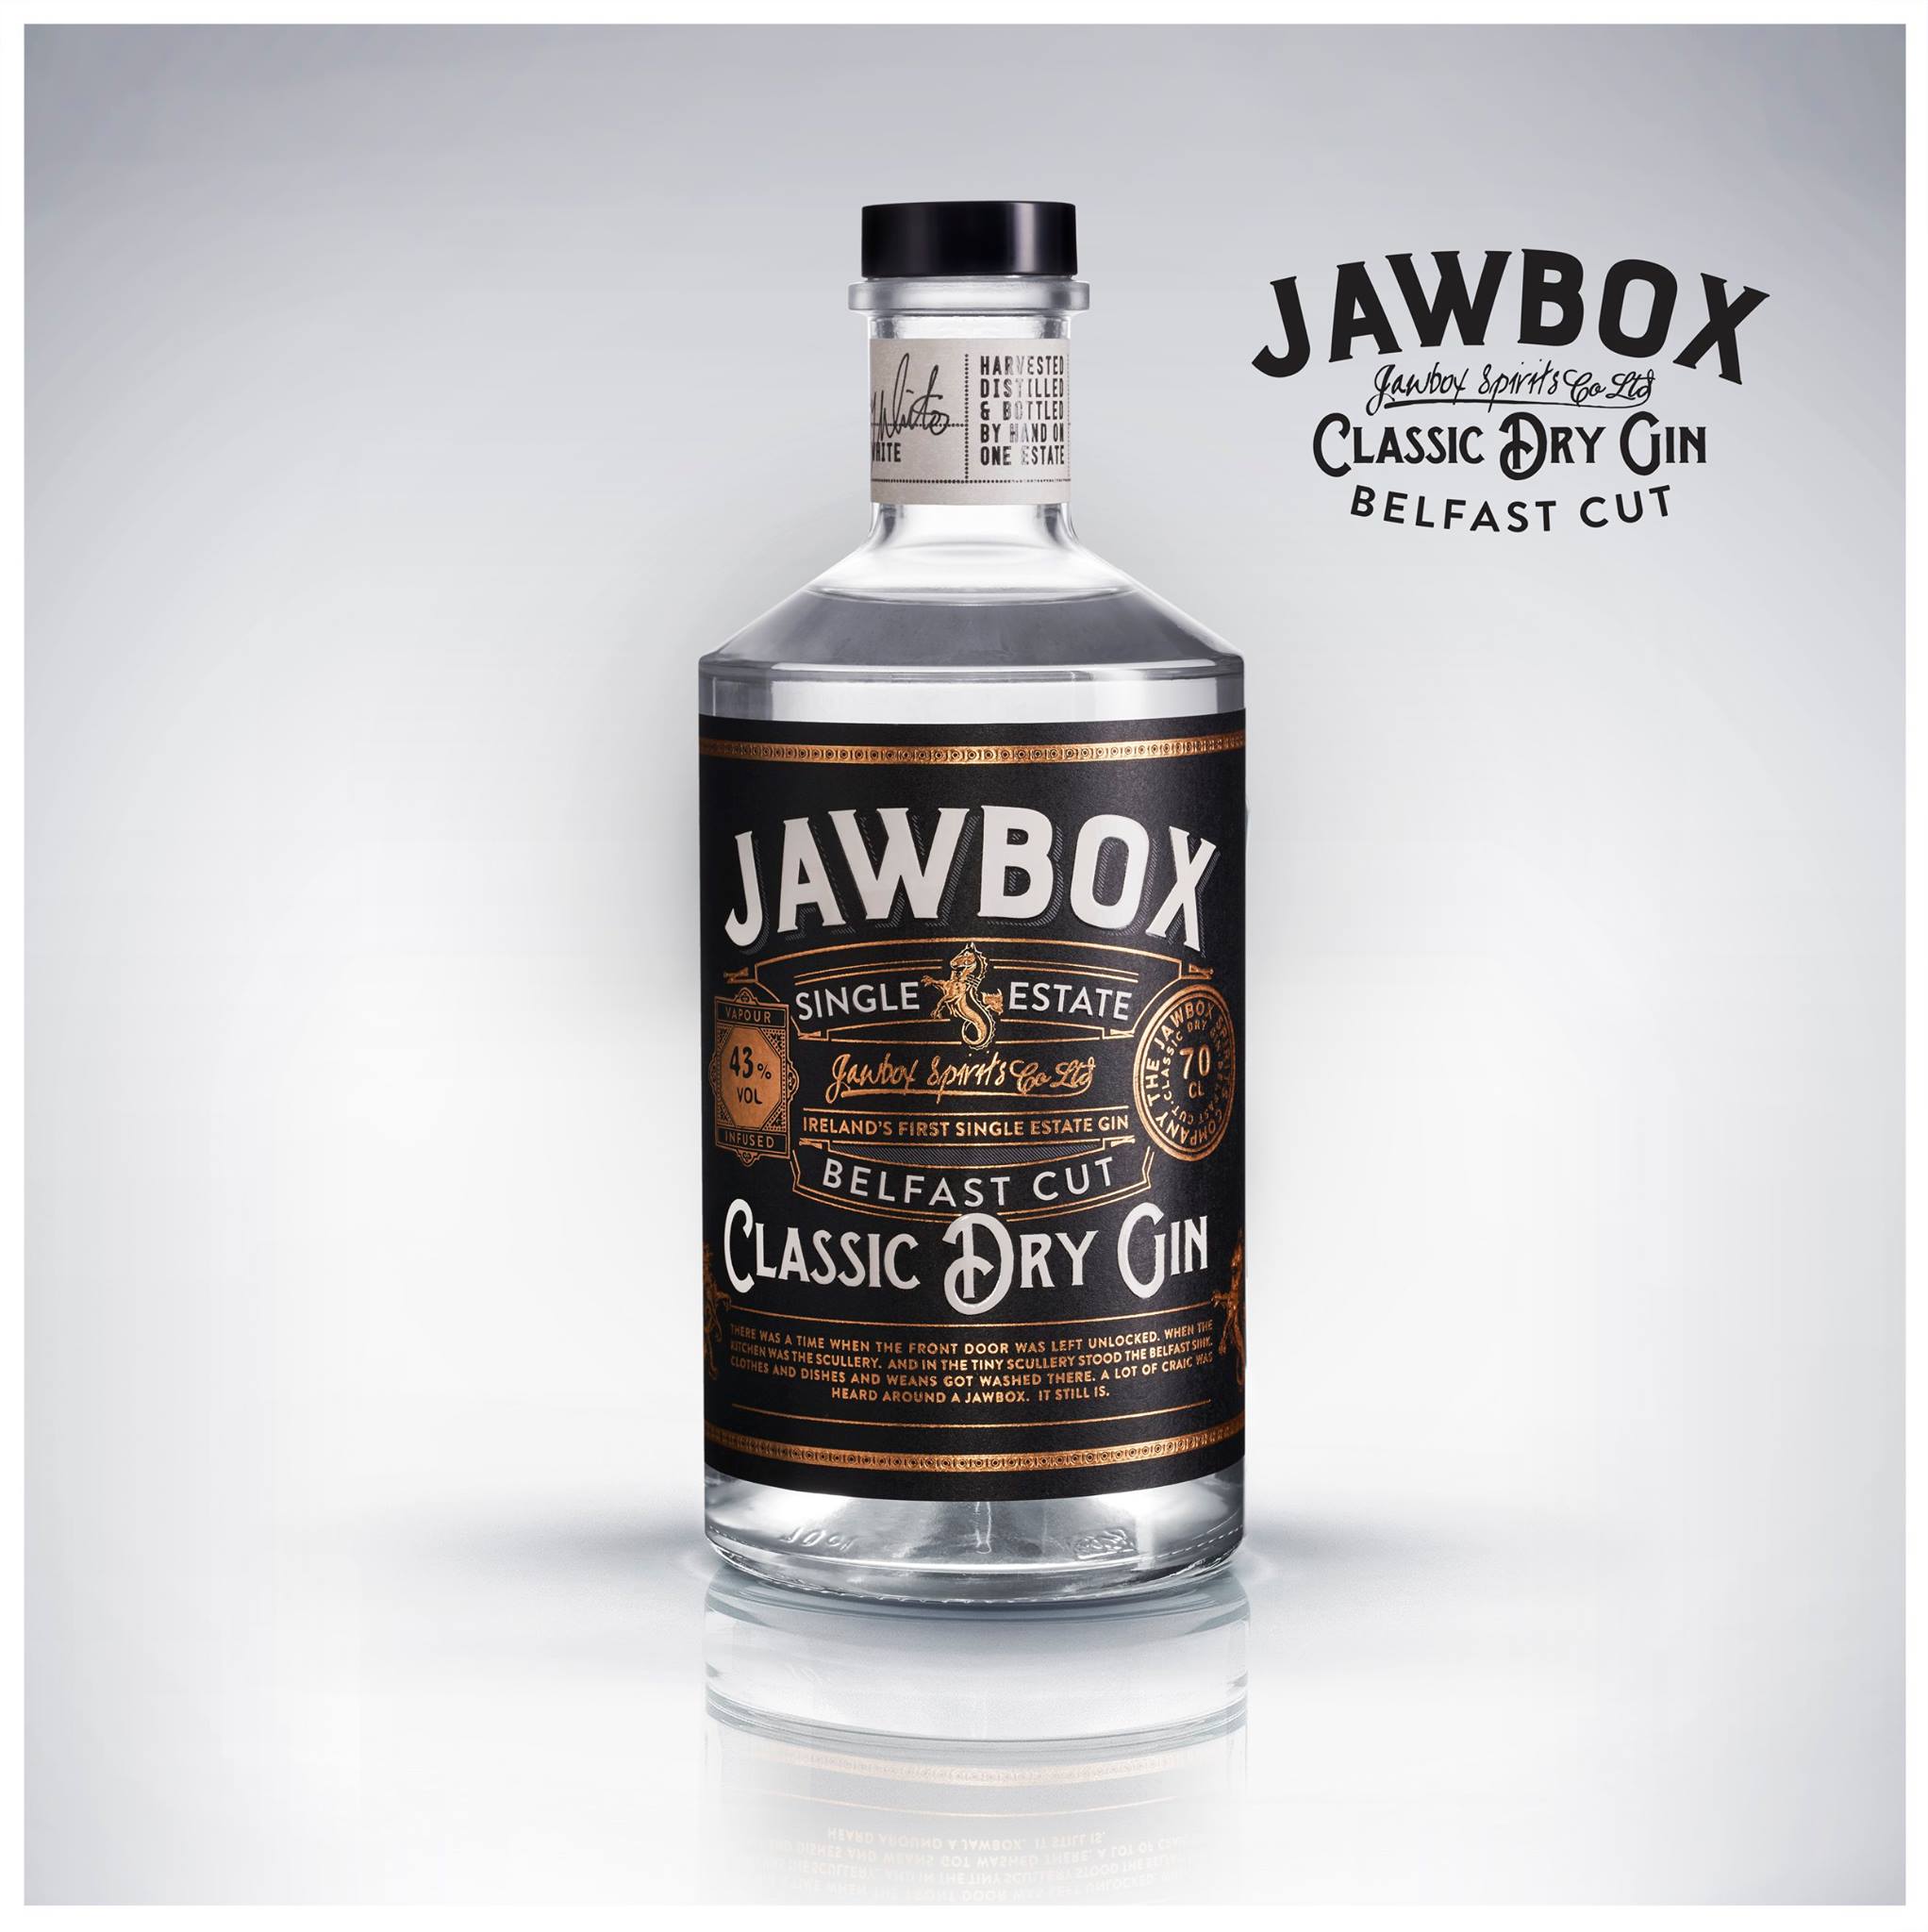 Jawbox Gin: Client Drinksology / Jawbox Gin more bottle imagery in drinks gallery.